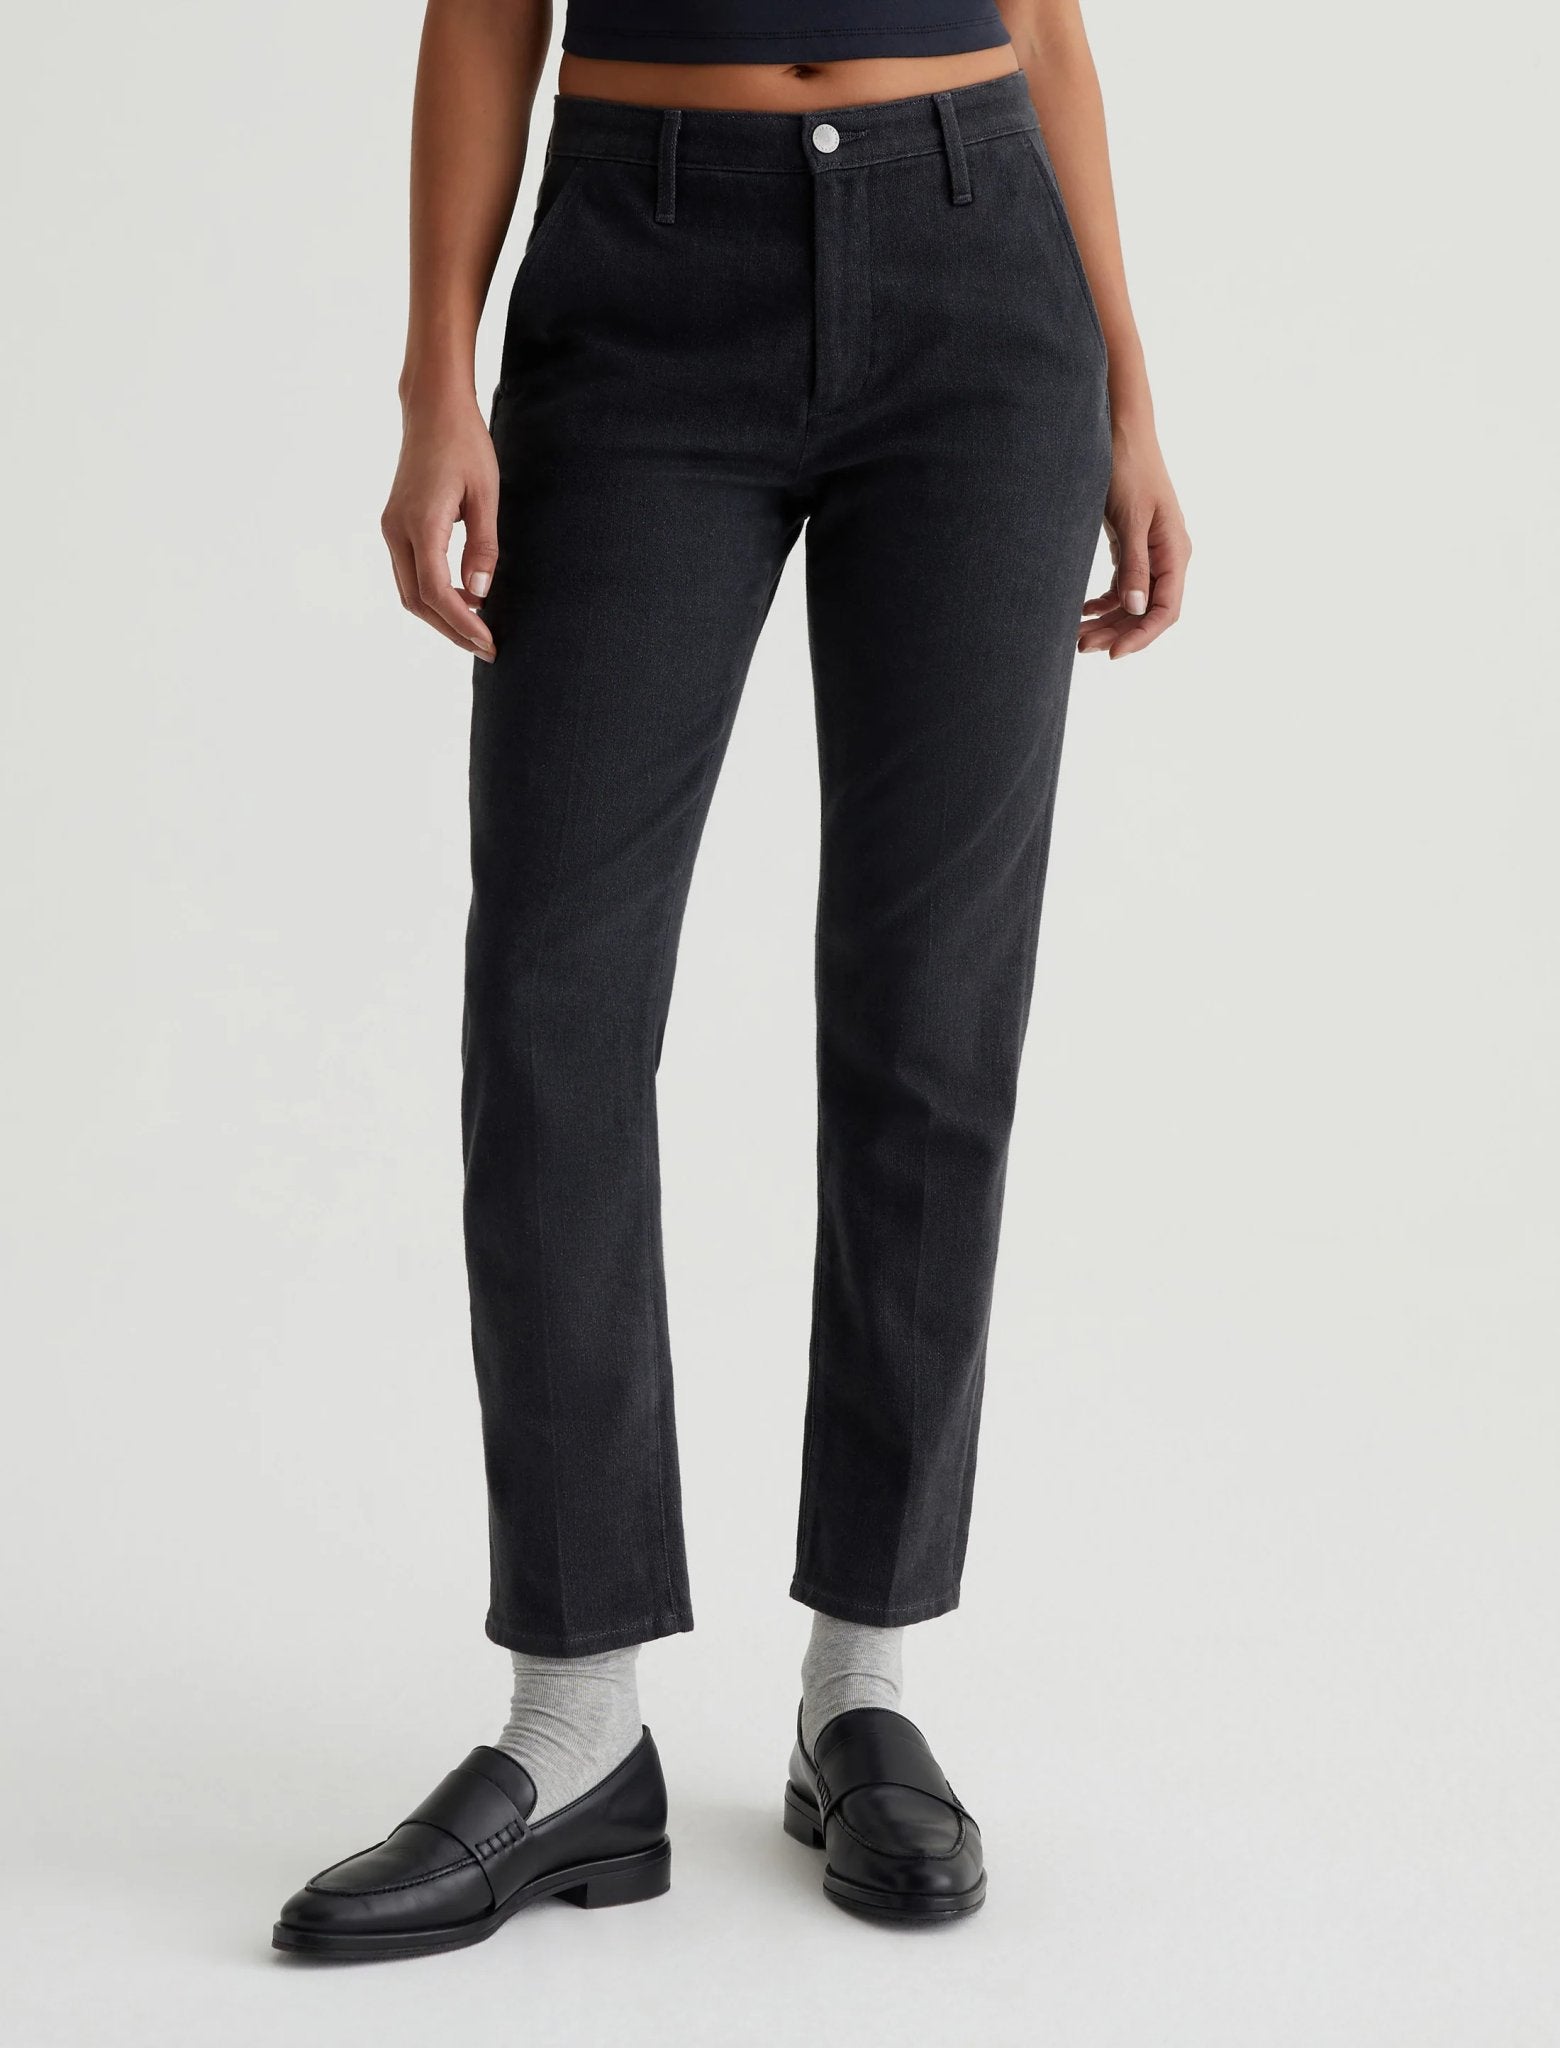 Caden Tailored Trousers - AG Jeans - Danali - HYB1613-CCLS-25